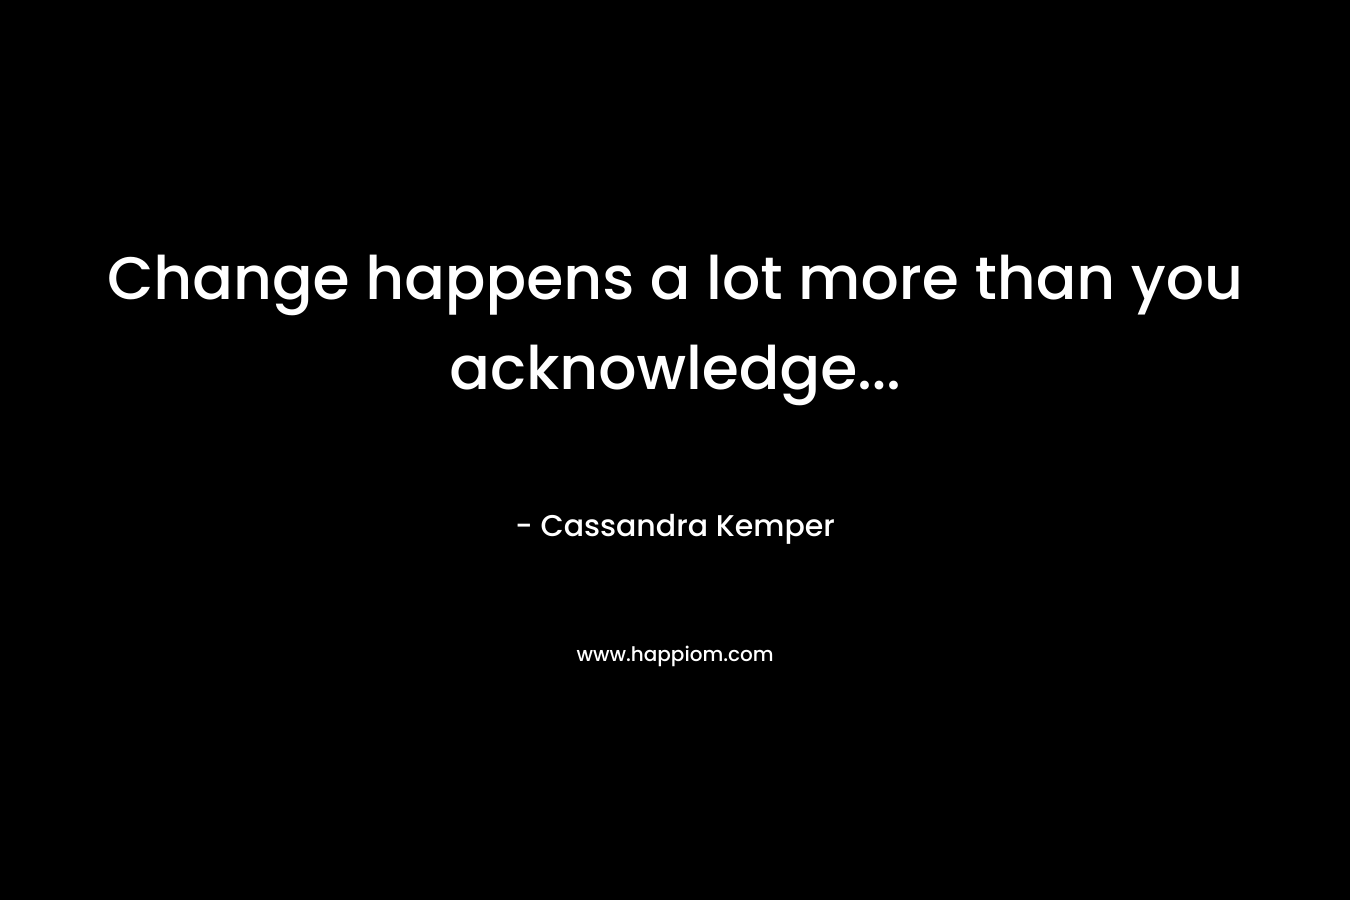 Change happens a lot more than you acknowledge...